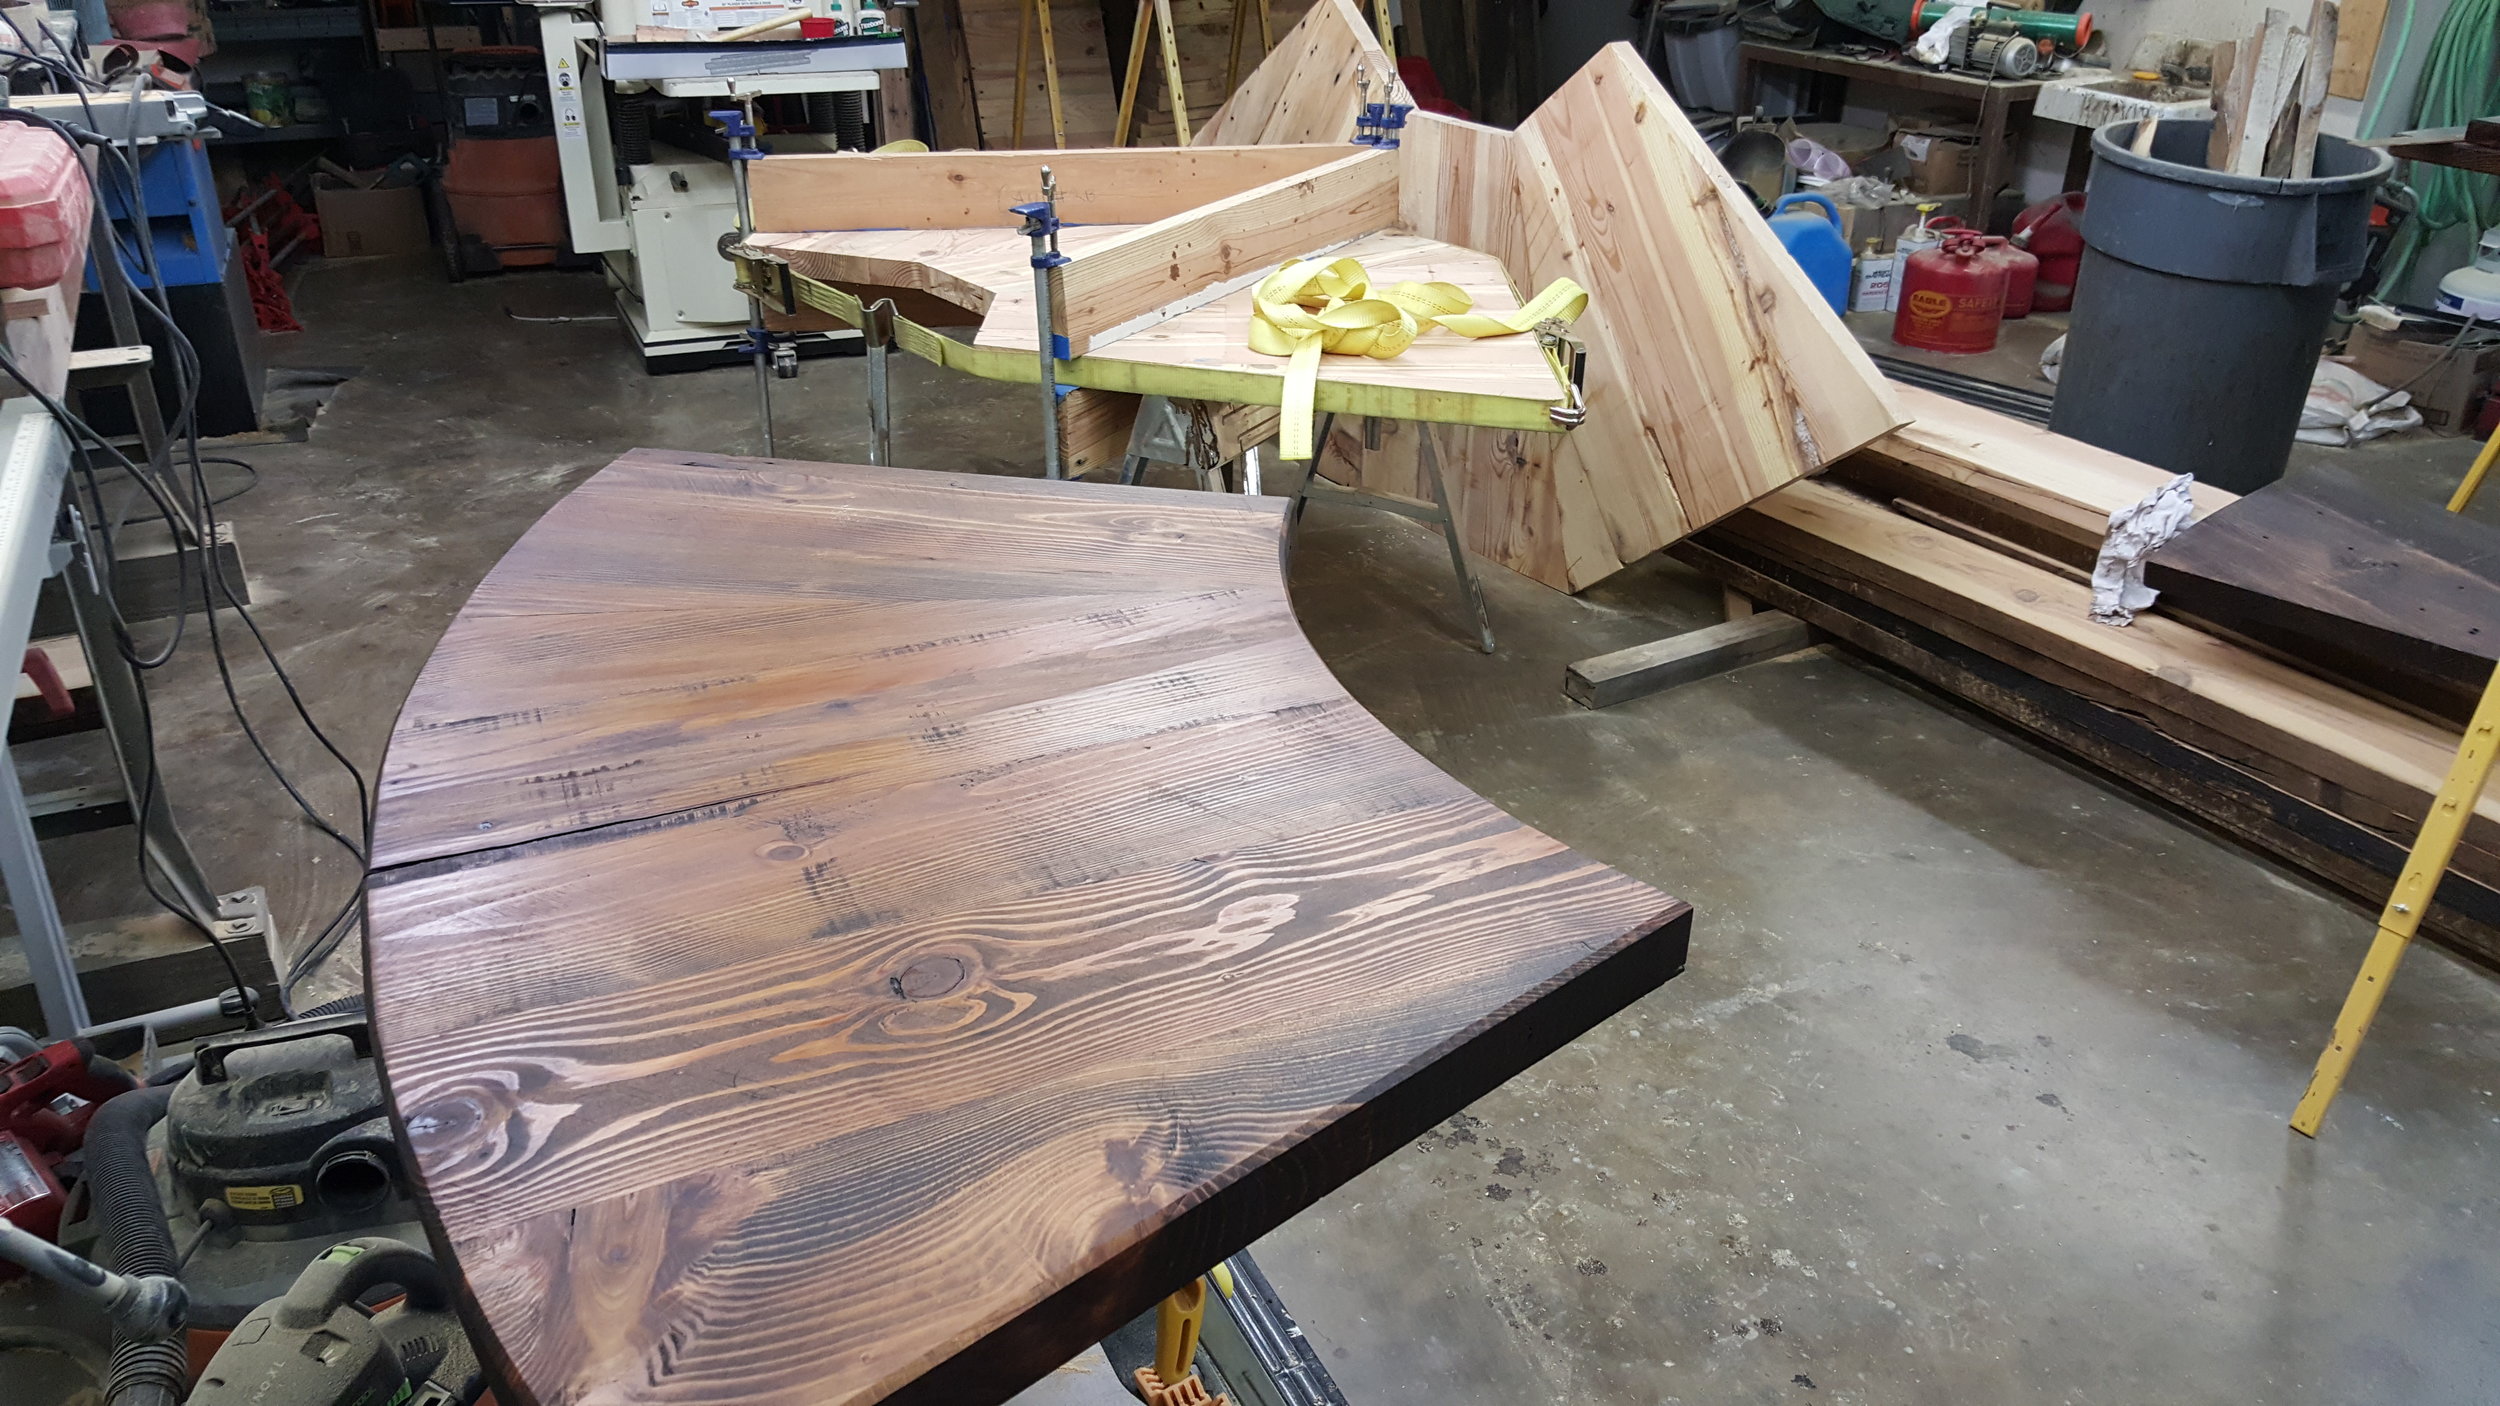  Background: Inventive clamping measures were taken.  Foreground: The stained ADA portion of the counter before top coat. 